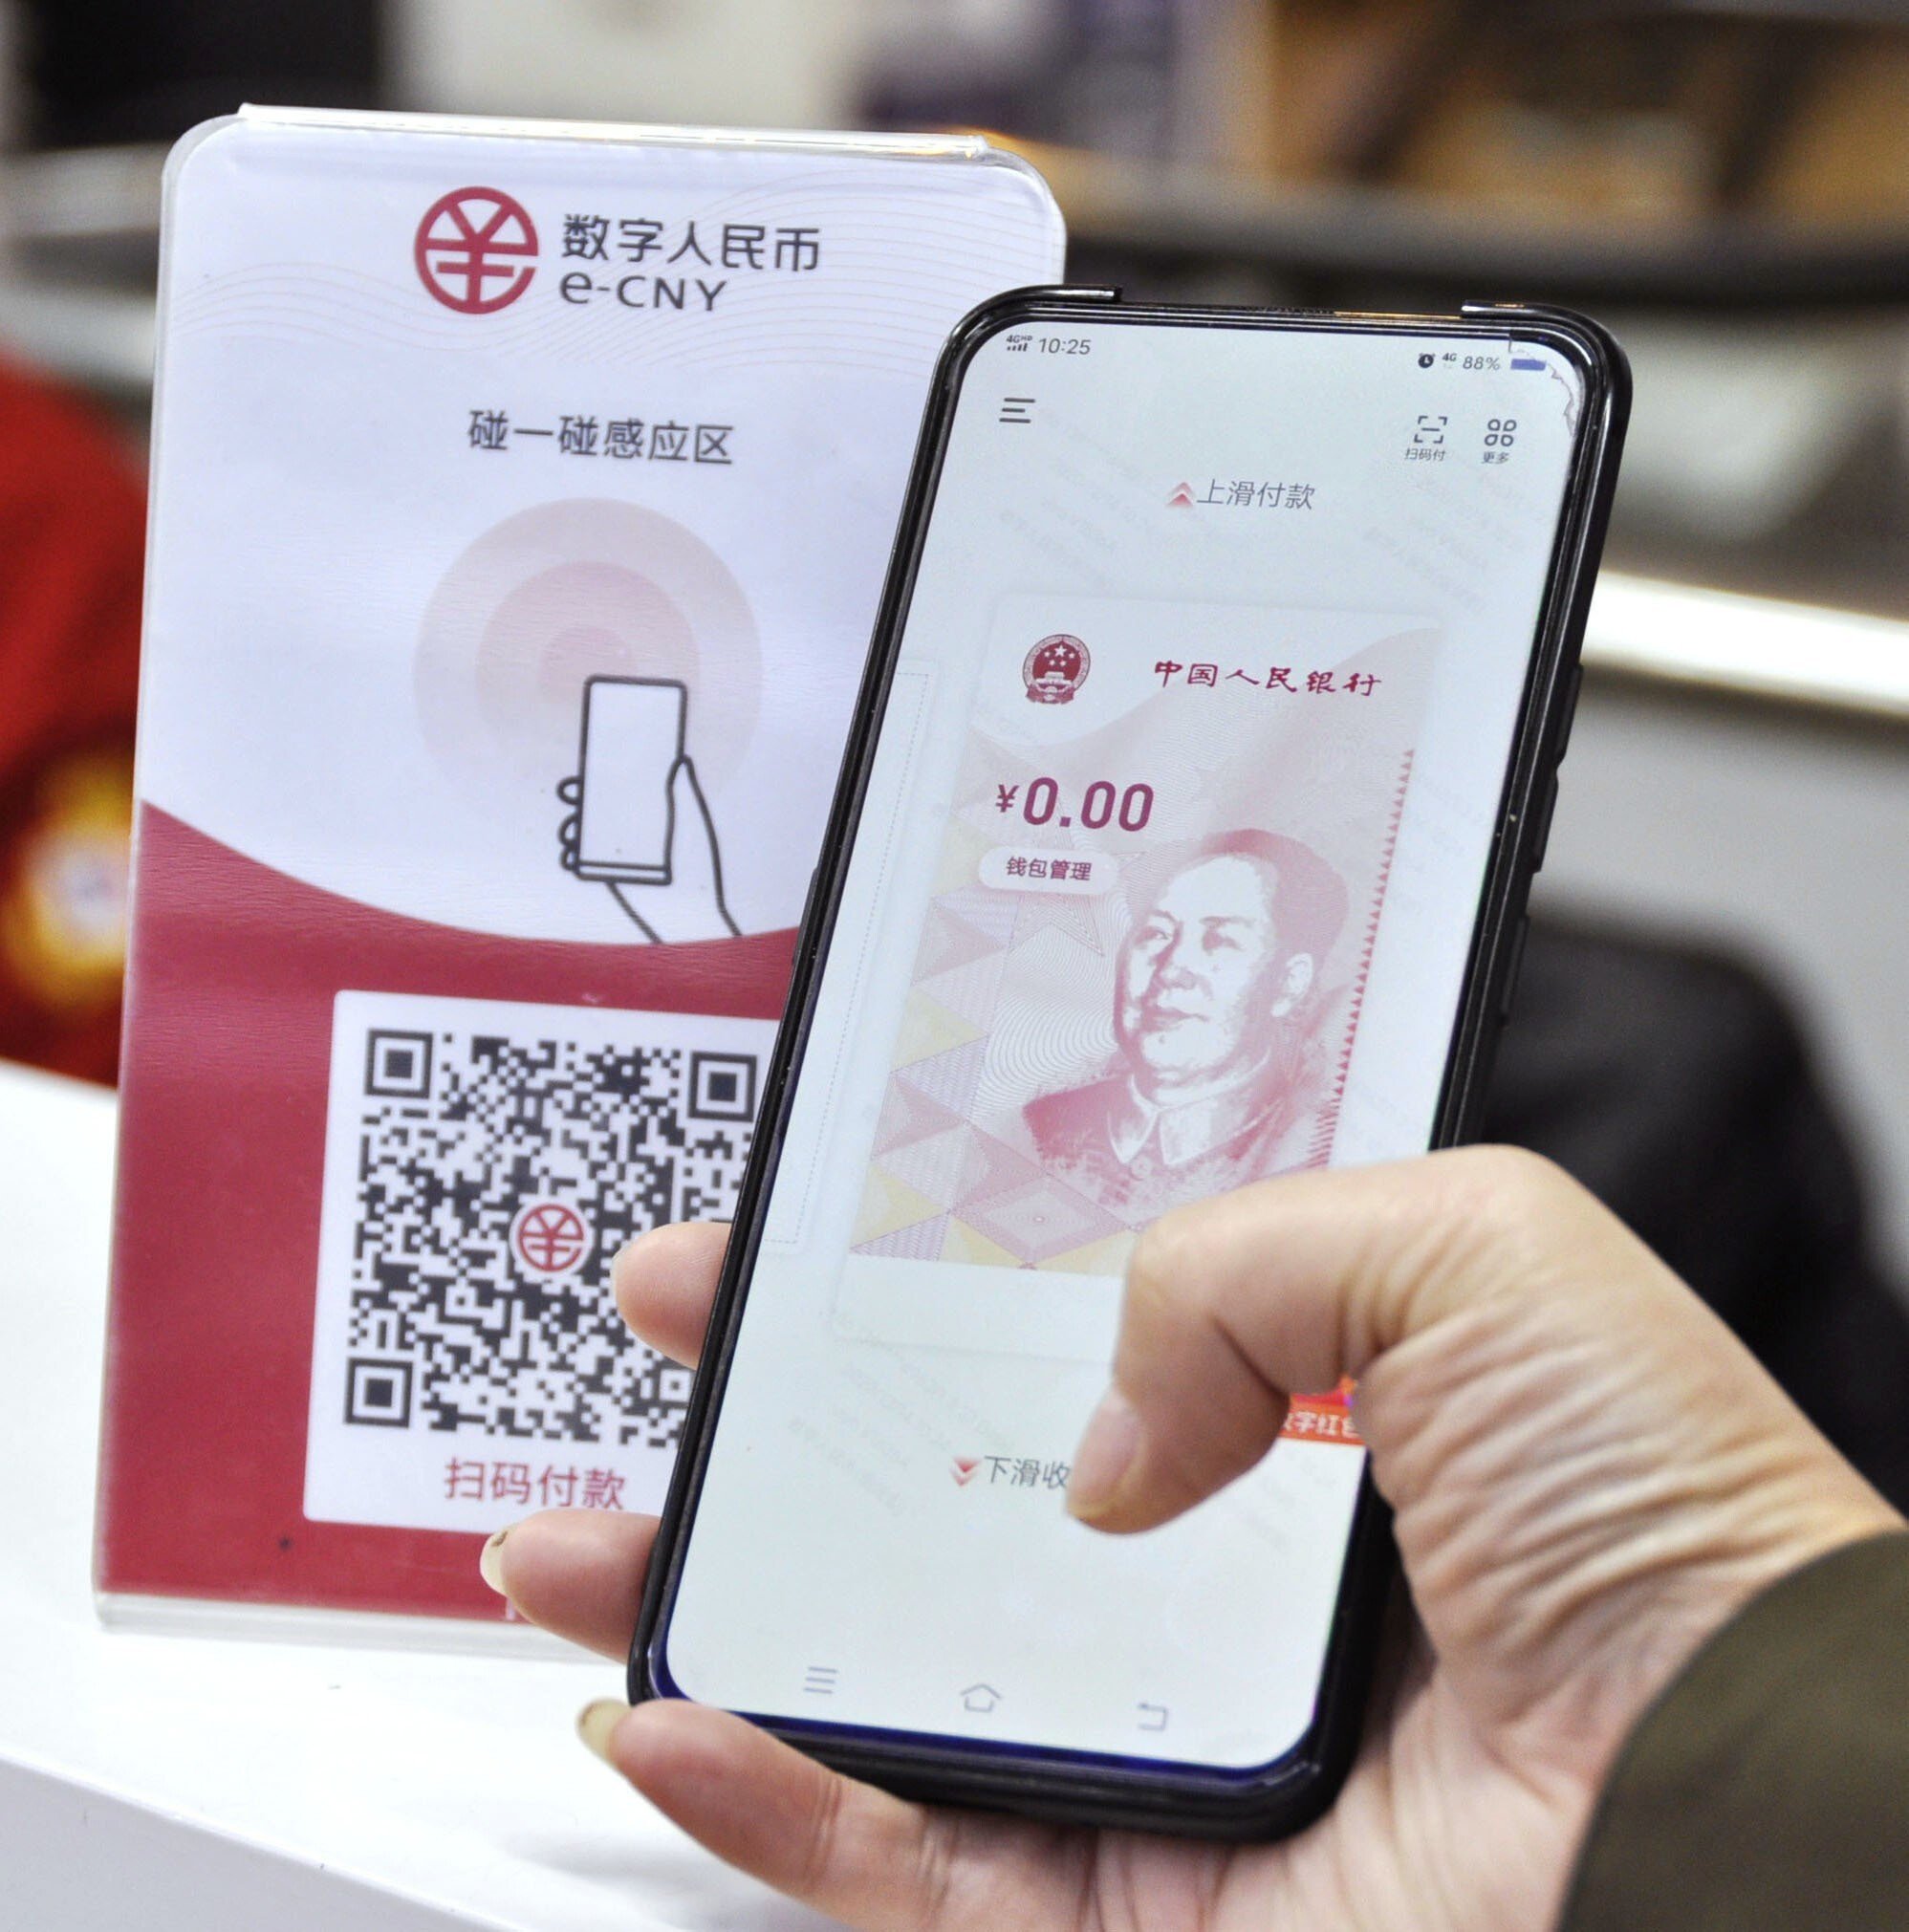 China began exploring the concept of a national virtual currency in 2014 with the success of e-commerce platforms Alibaba, Tencent and Baidu. Photo: Kyodo